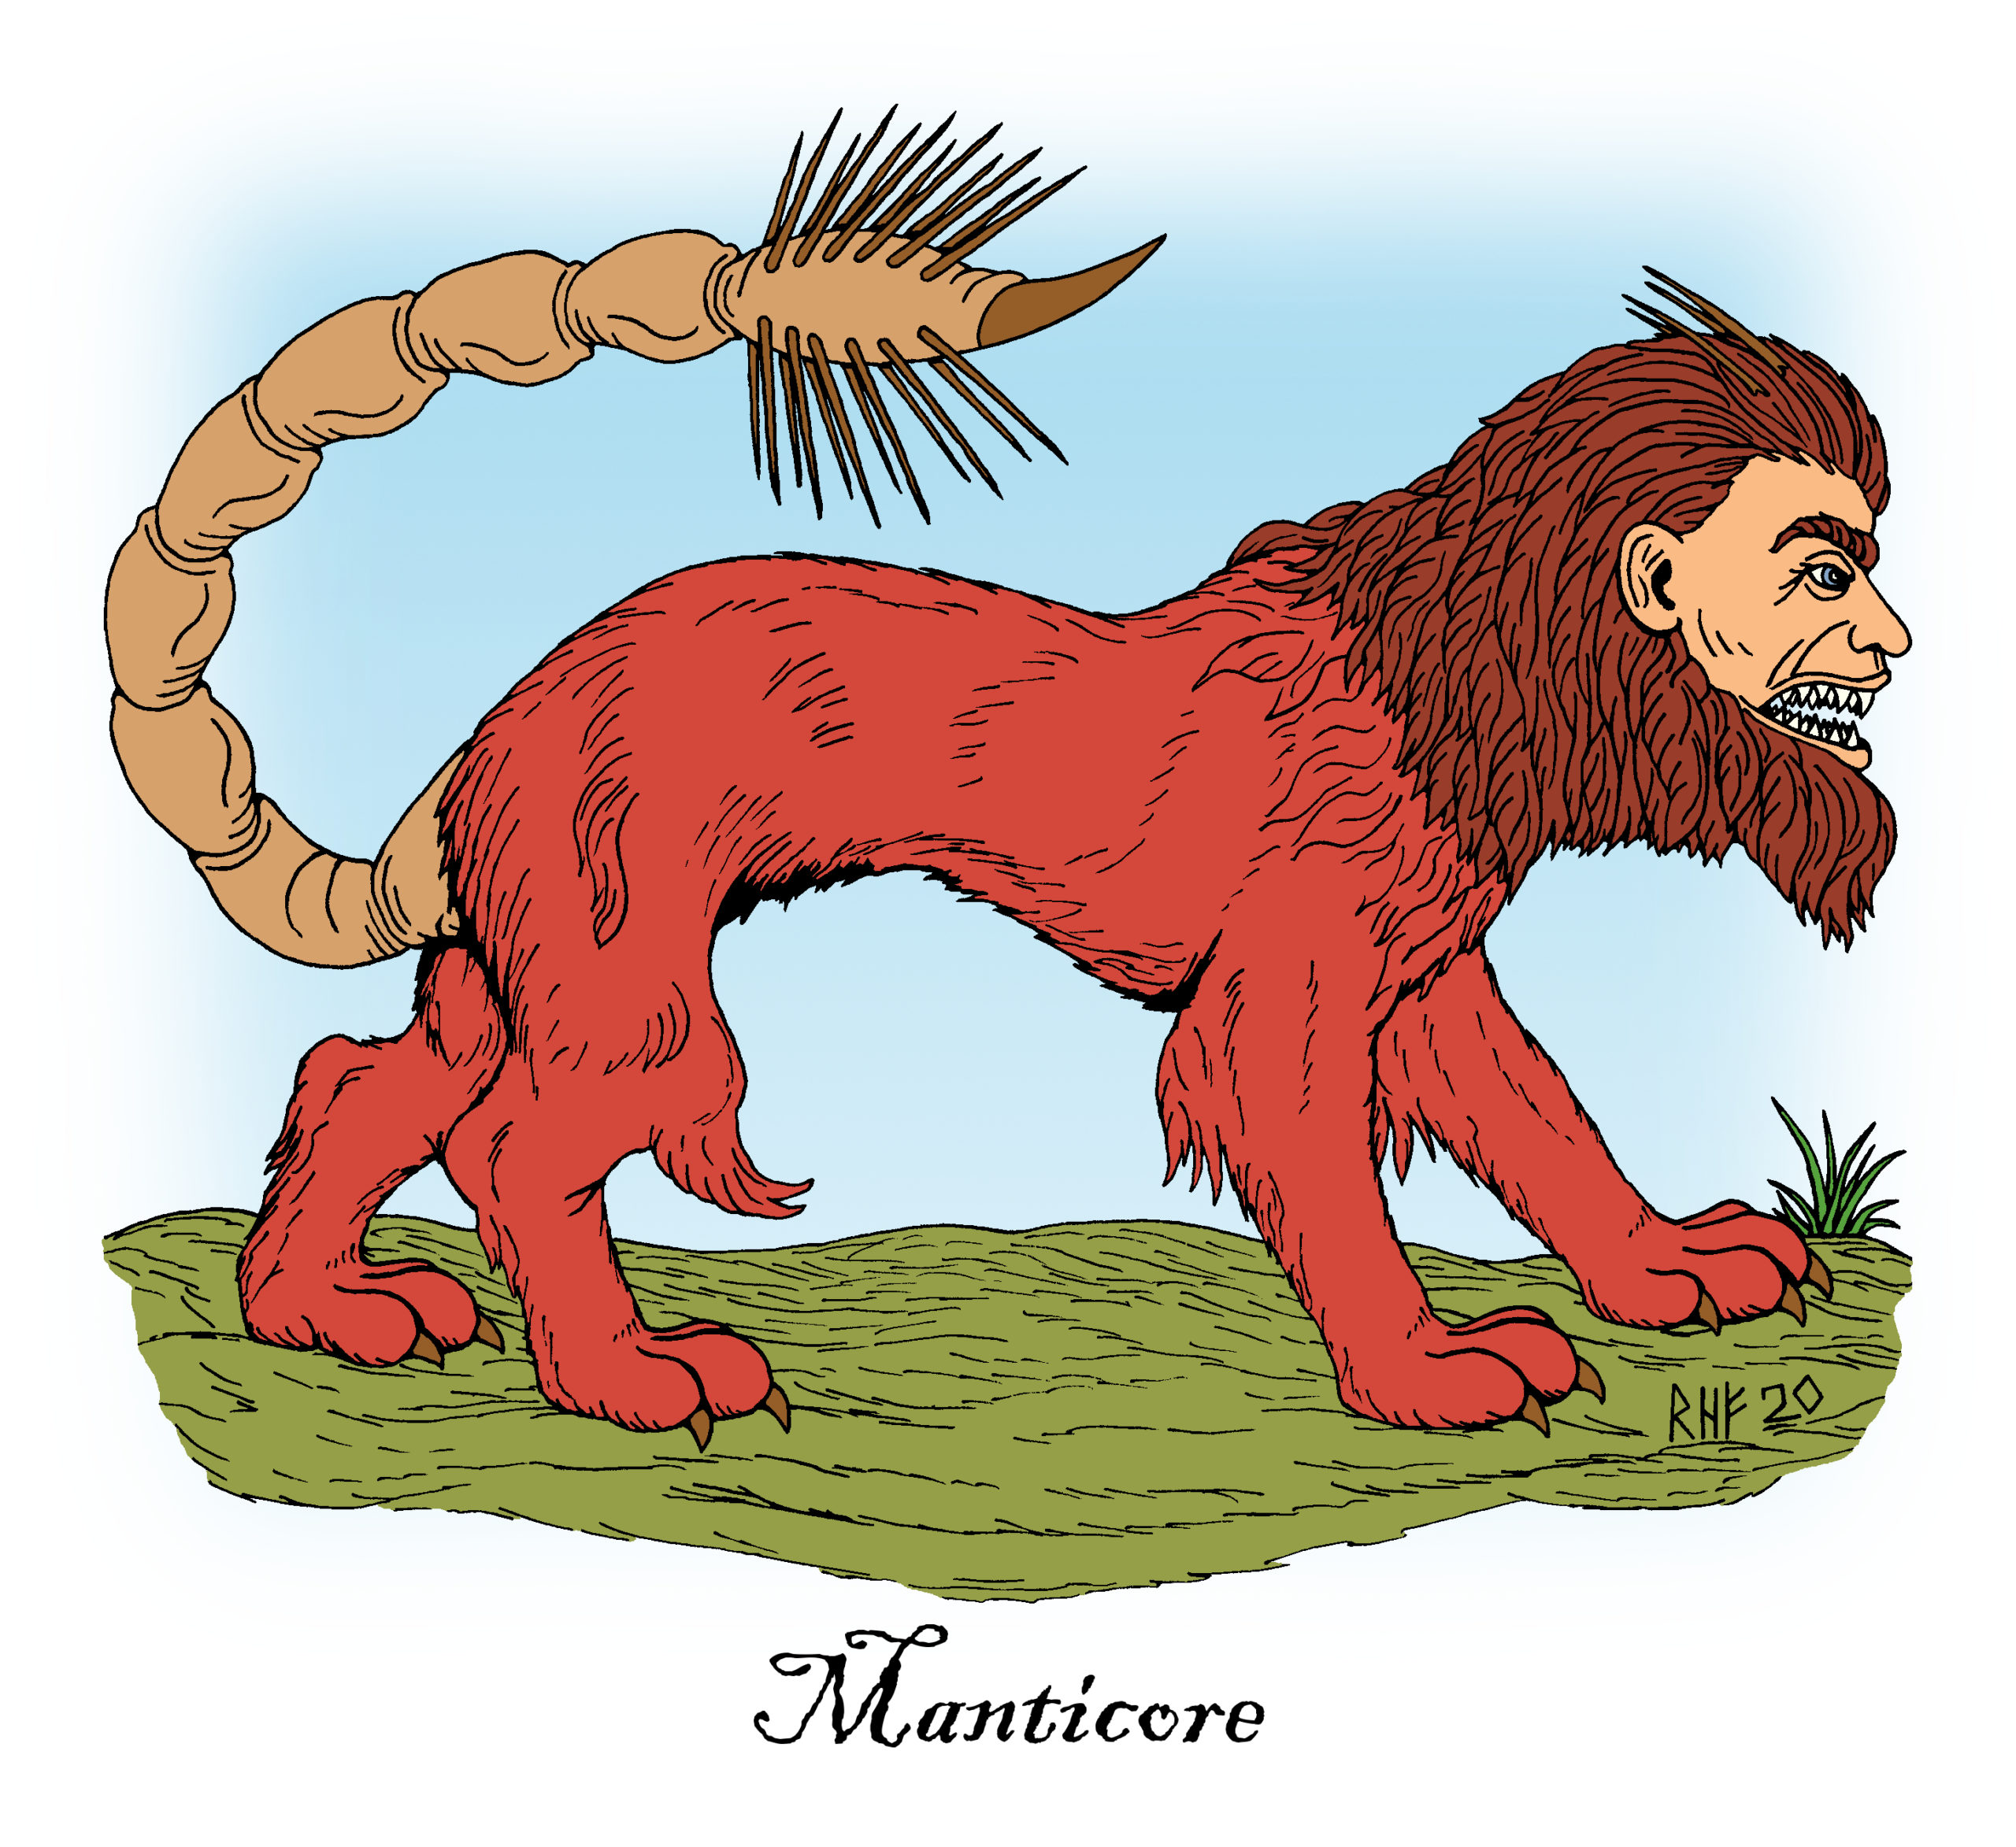 Manticore: Man-Eating Hybrid Beast of Legend and Art by Richard H. Fay 1